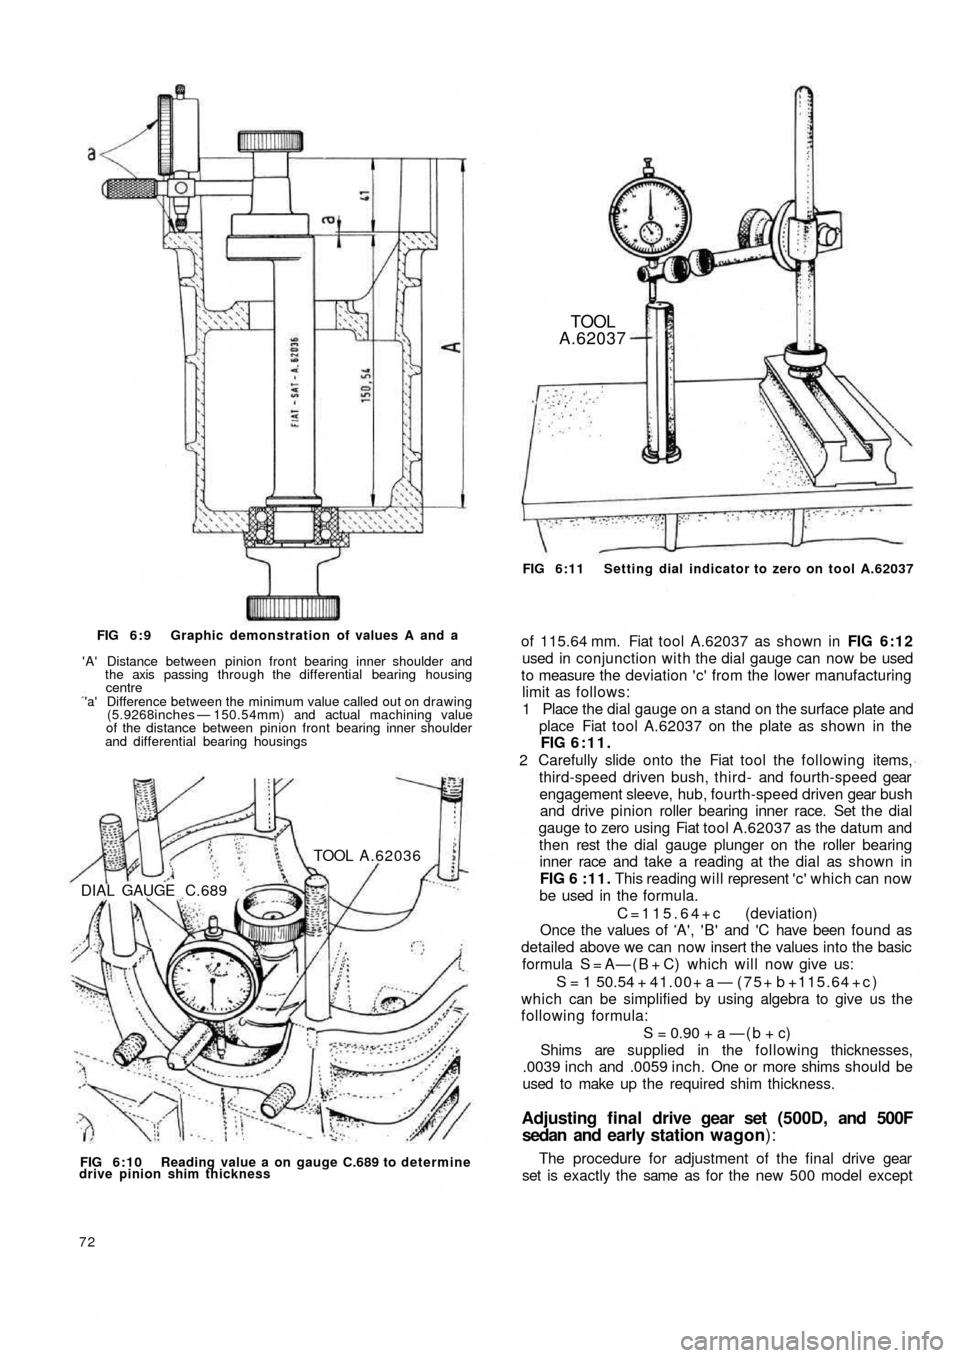 FIAT 500 1969 1.G Repair Manual FIG 6:9  Graphic demonstration of values A and a
A Distance between pinion front bearing inner shoulder and
the axis passing through the differential bearing housing
centrea Difference between the